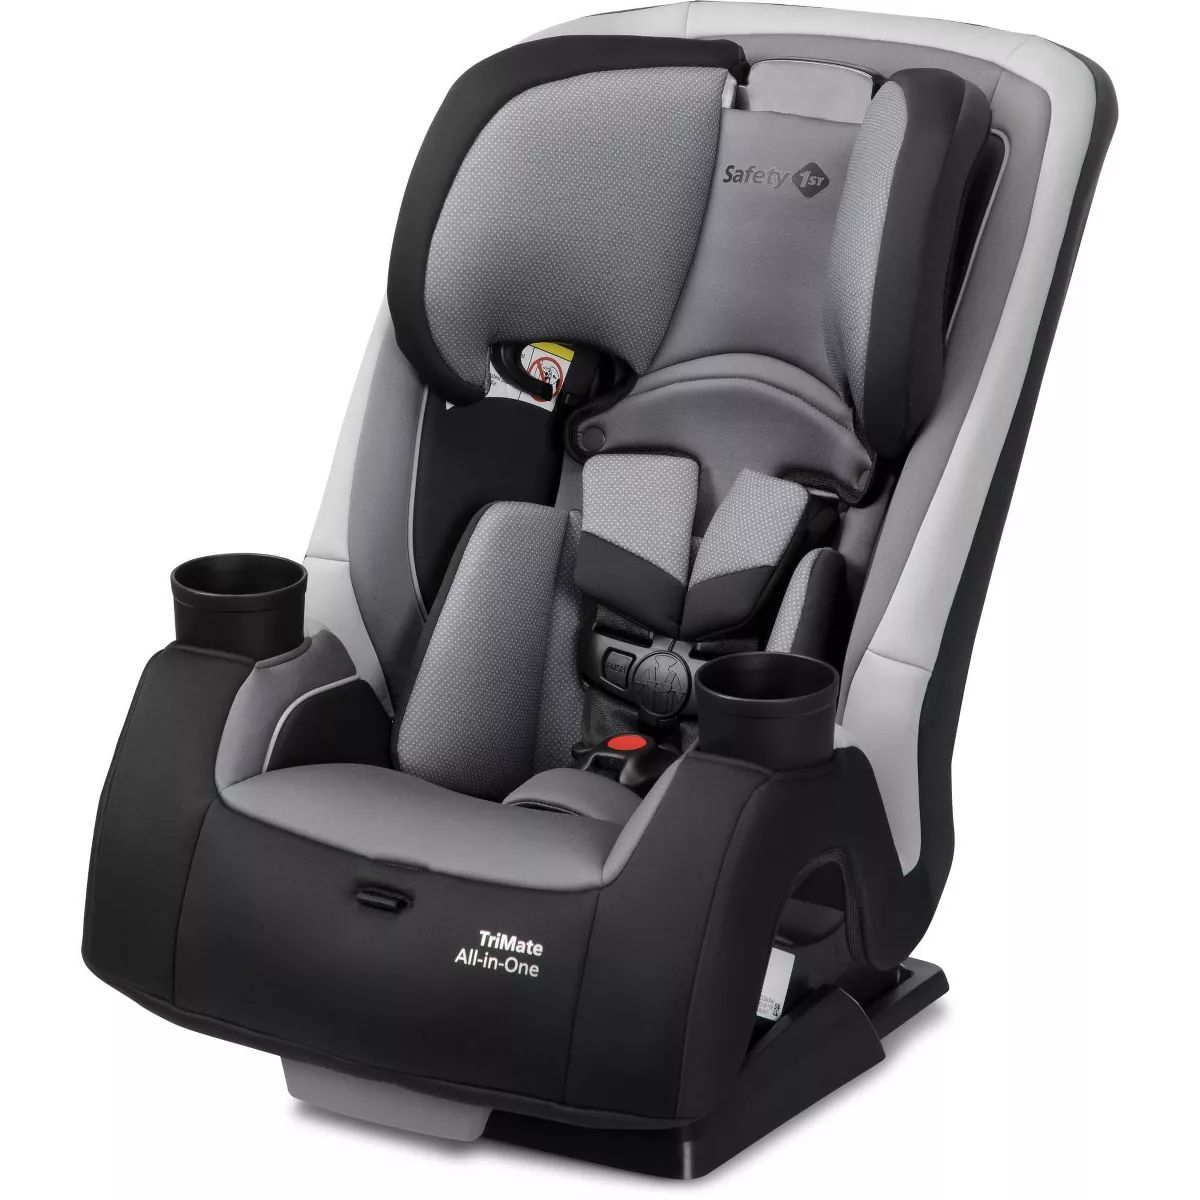 Safety 1st TriMate All-in-One Convertible Car Seat | Target